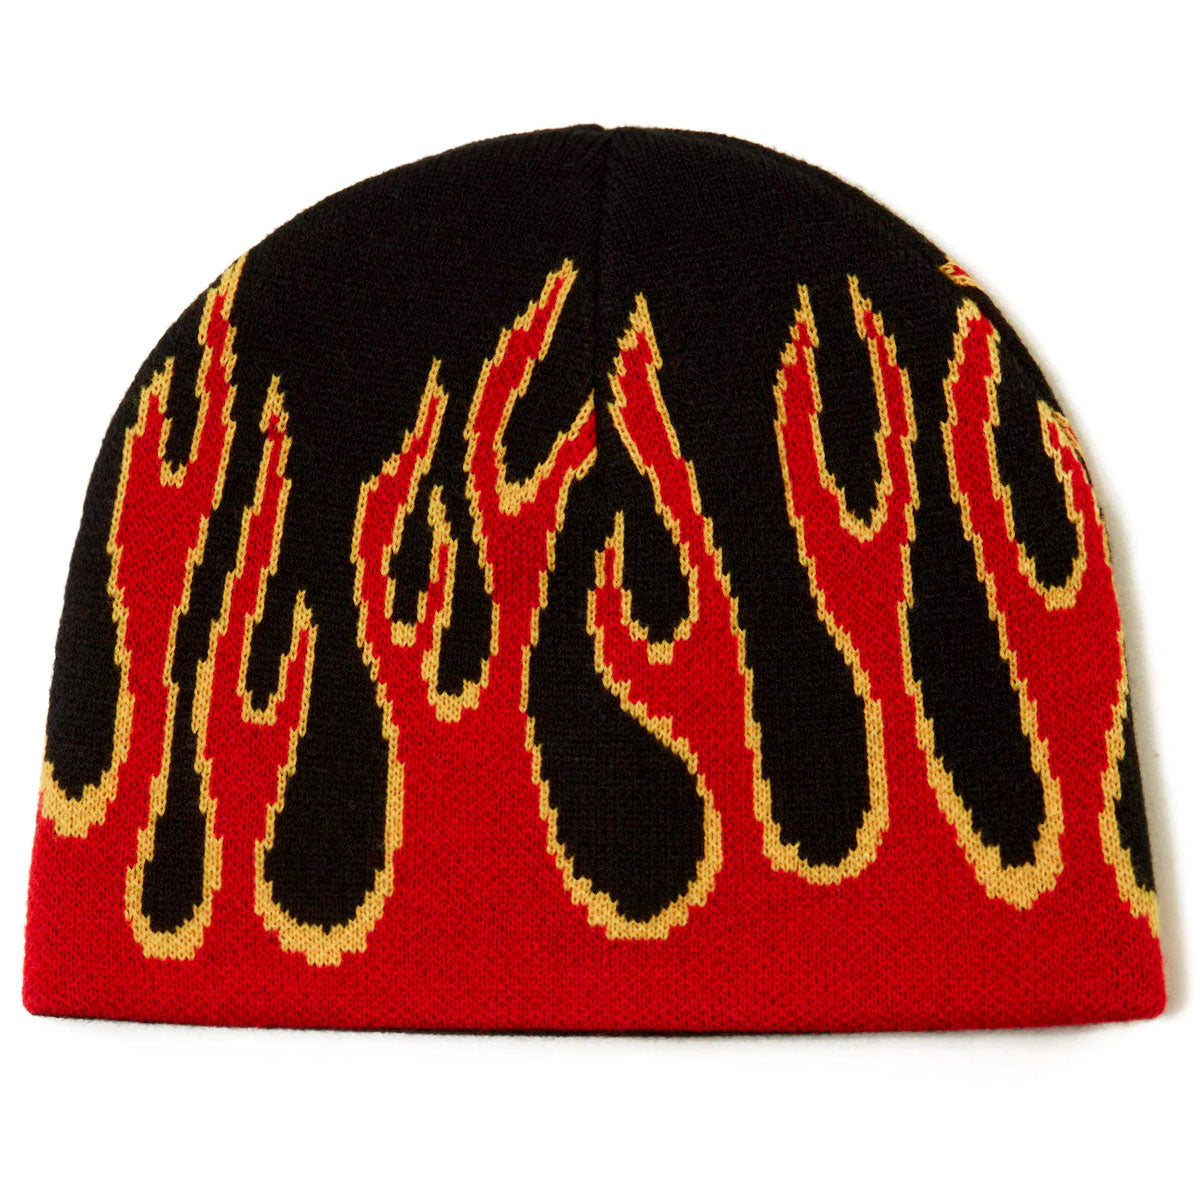 CCS Flames Reversible Skully Beanie - Black/Red image 2